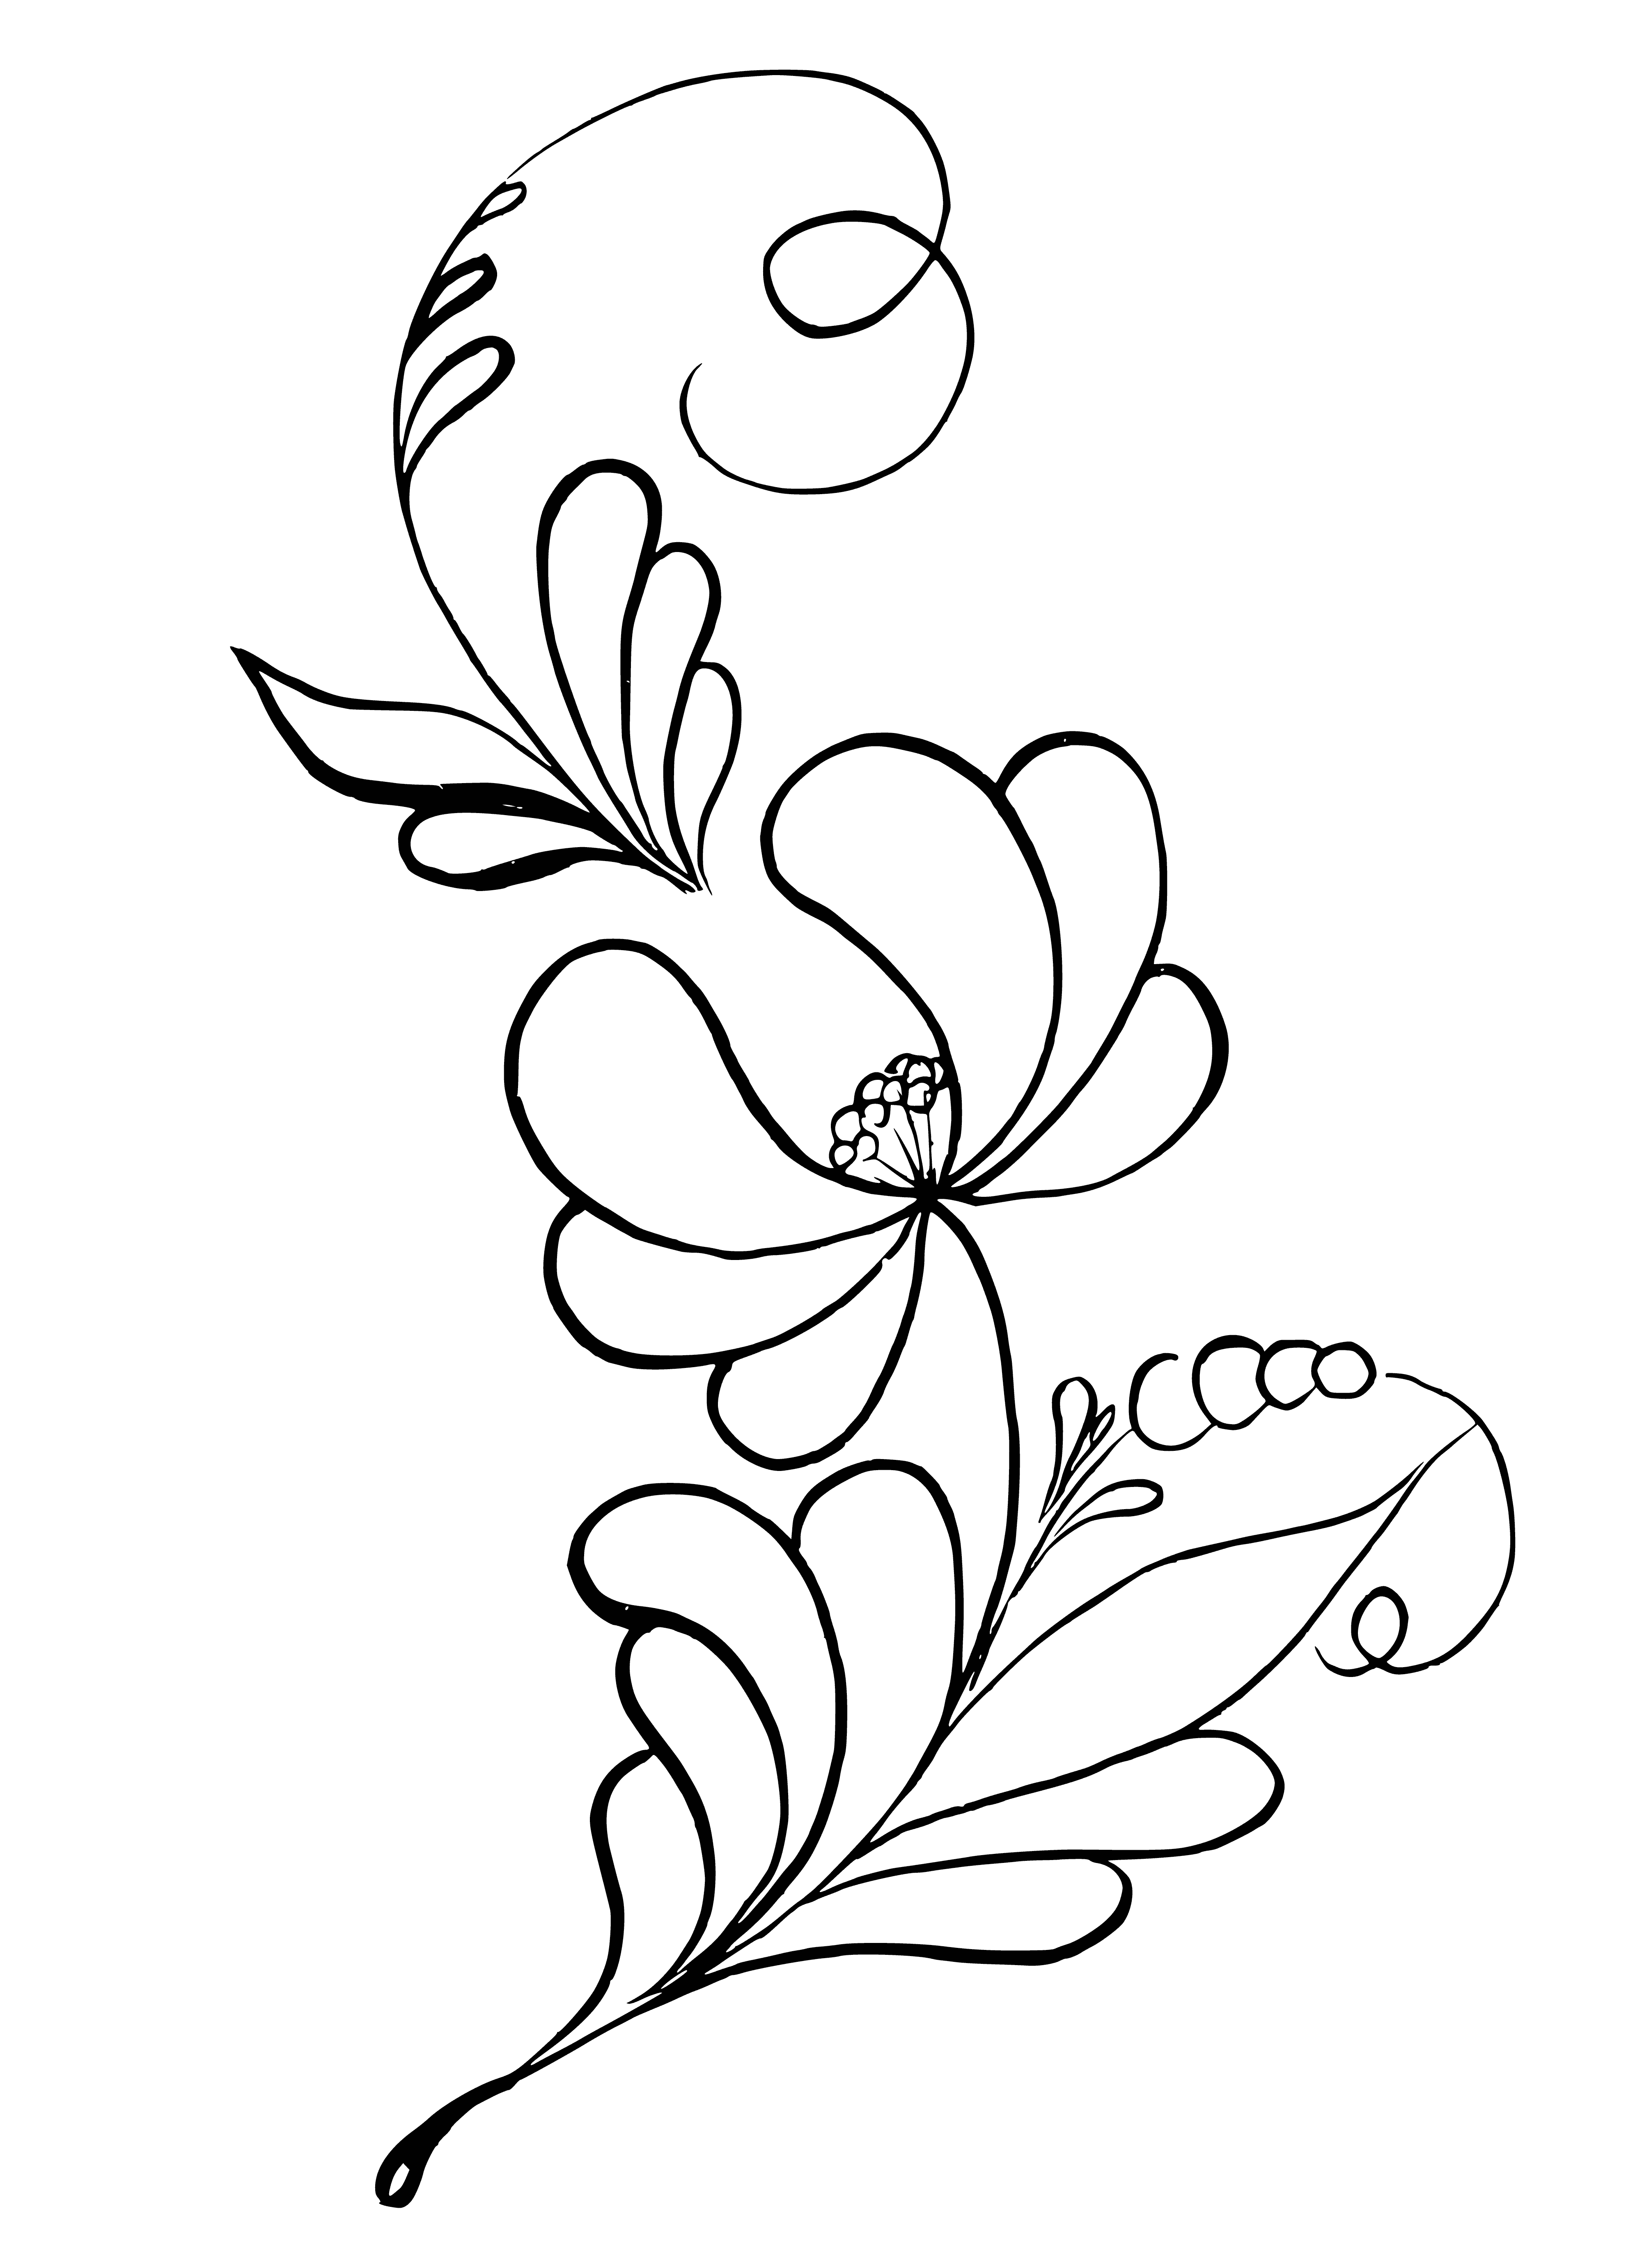 coloring page: Painting has patterns - some geometric, some not - plus symbols. #artfacts